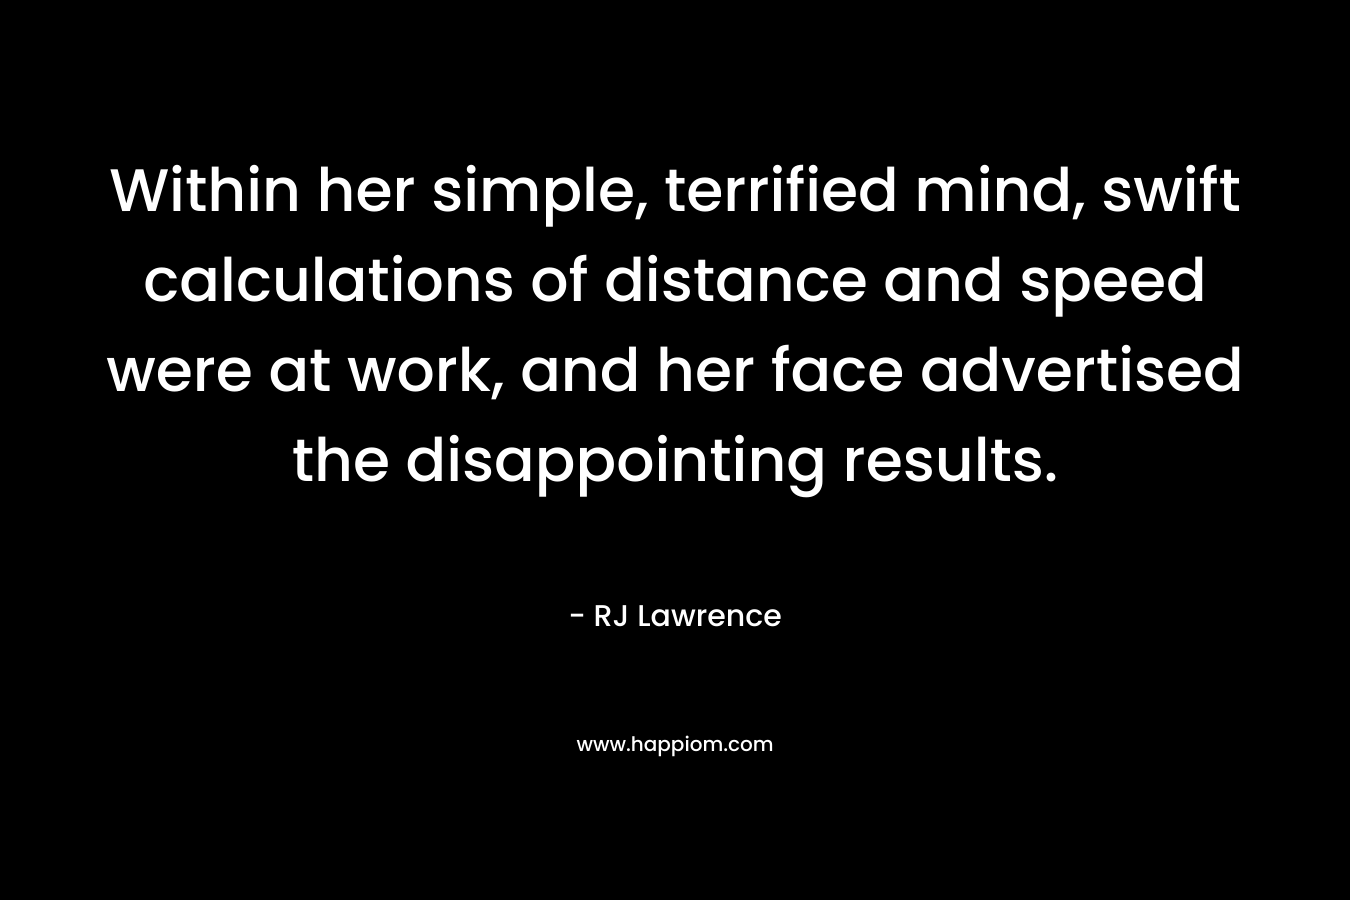 Within her simple, terrified mind, swift calculations of distance and speed were at work, and her face advertised the disappointing results.